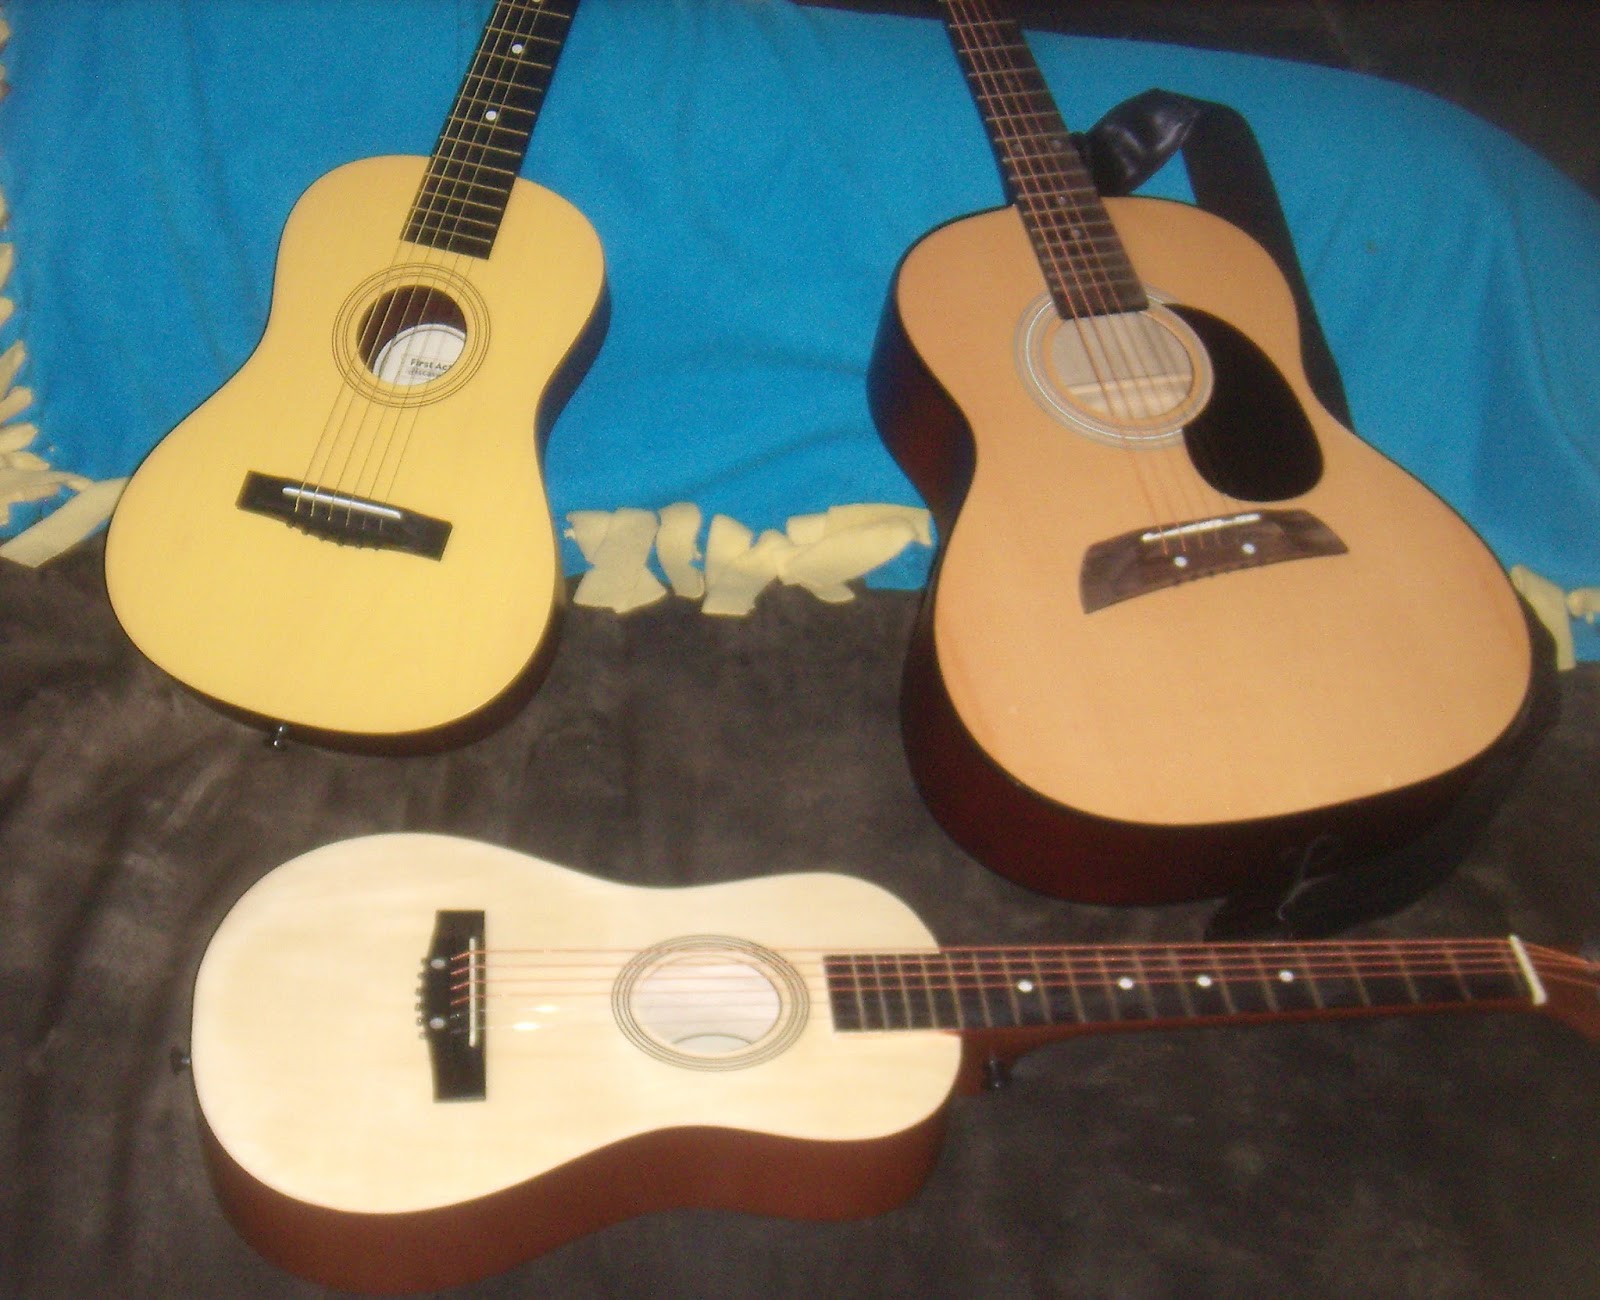 Mommie of 2: First Act Guitar Reviews